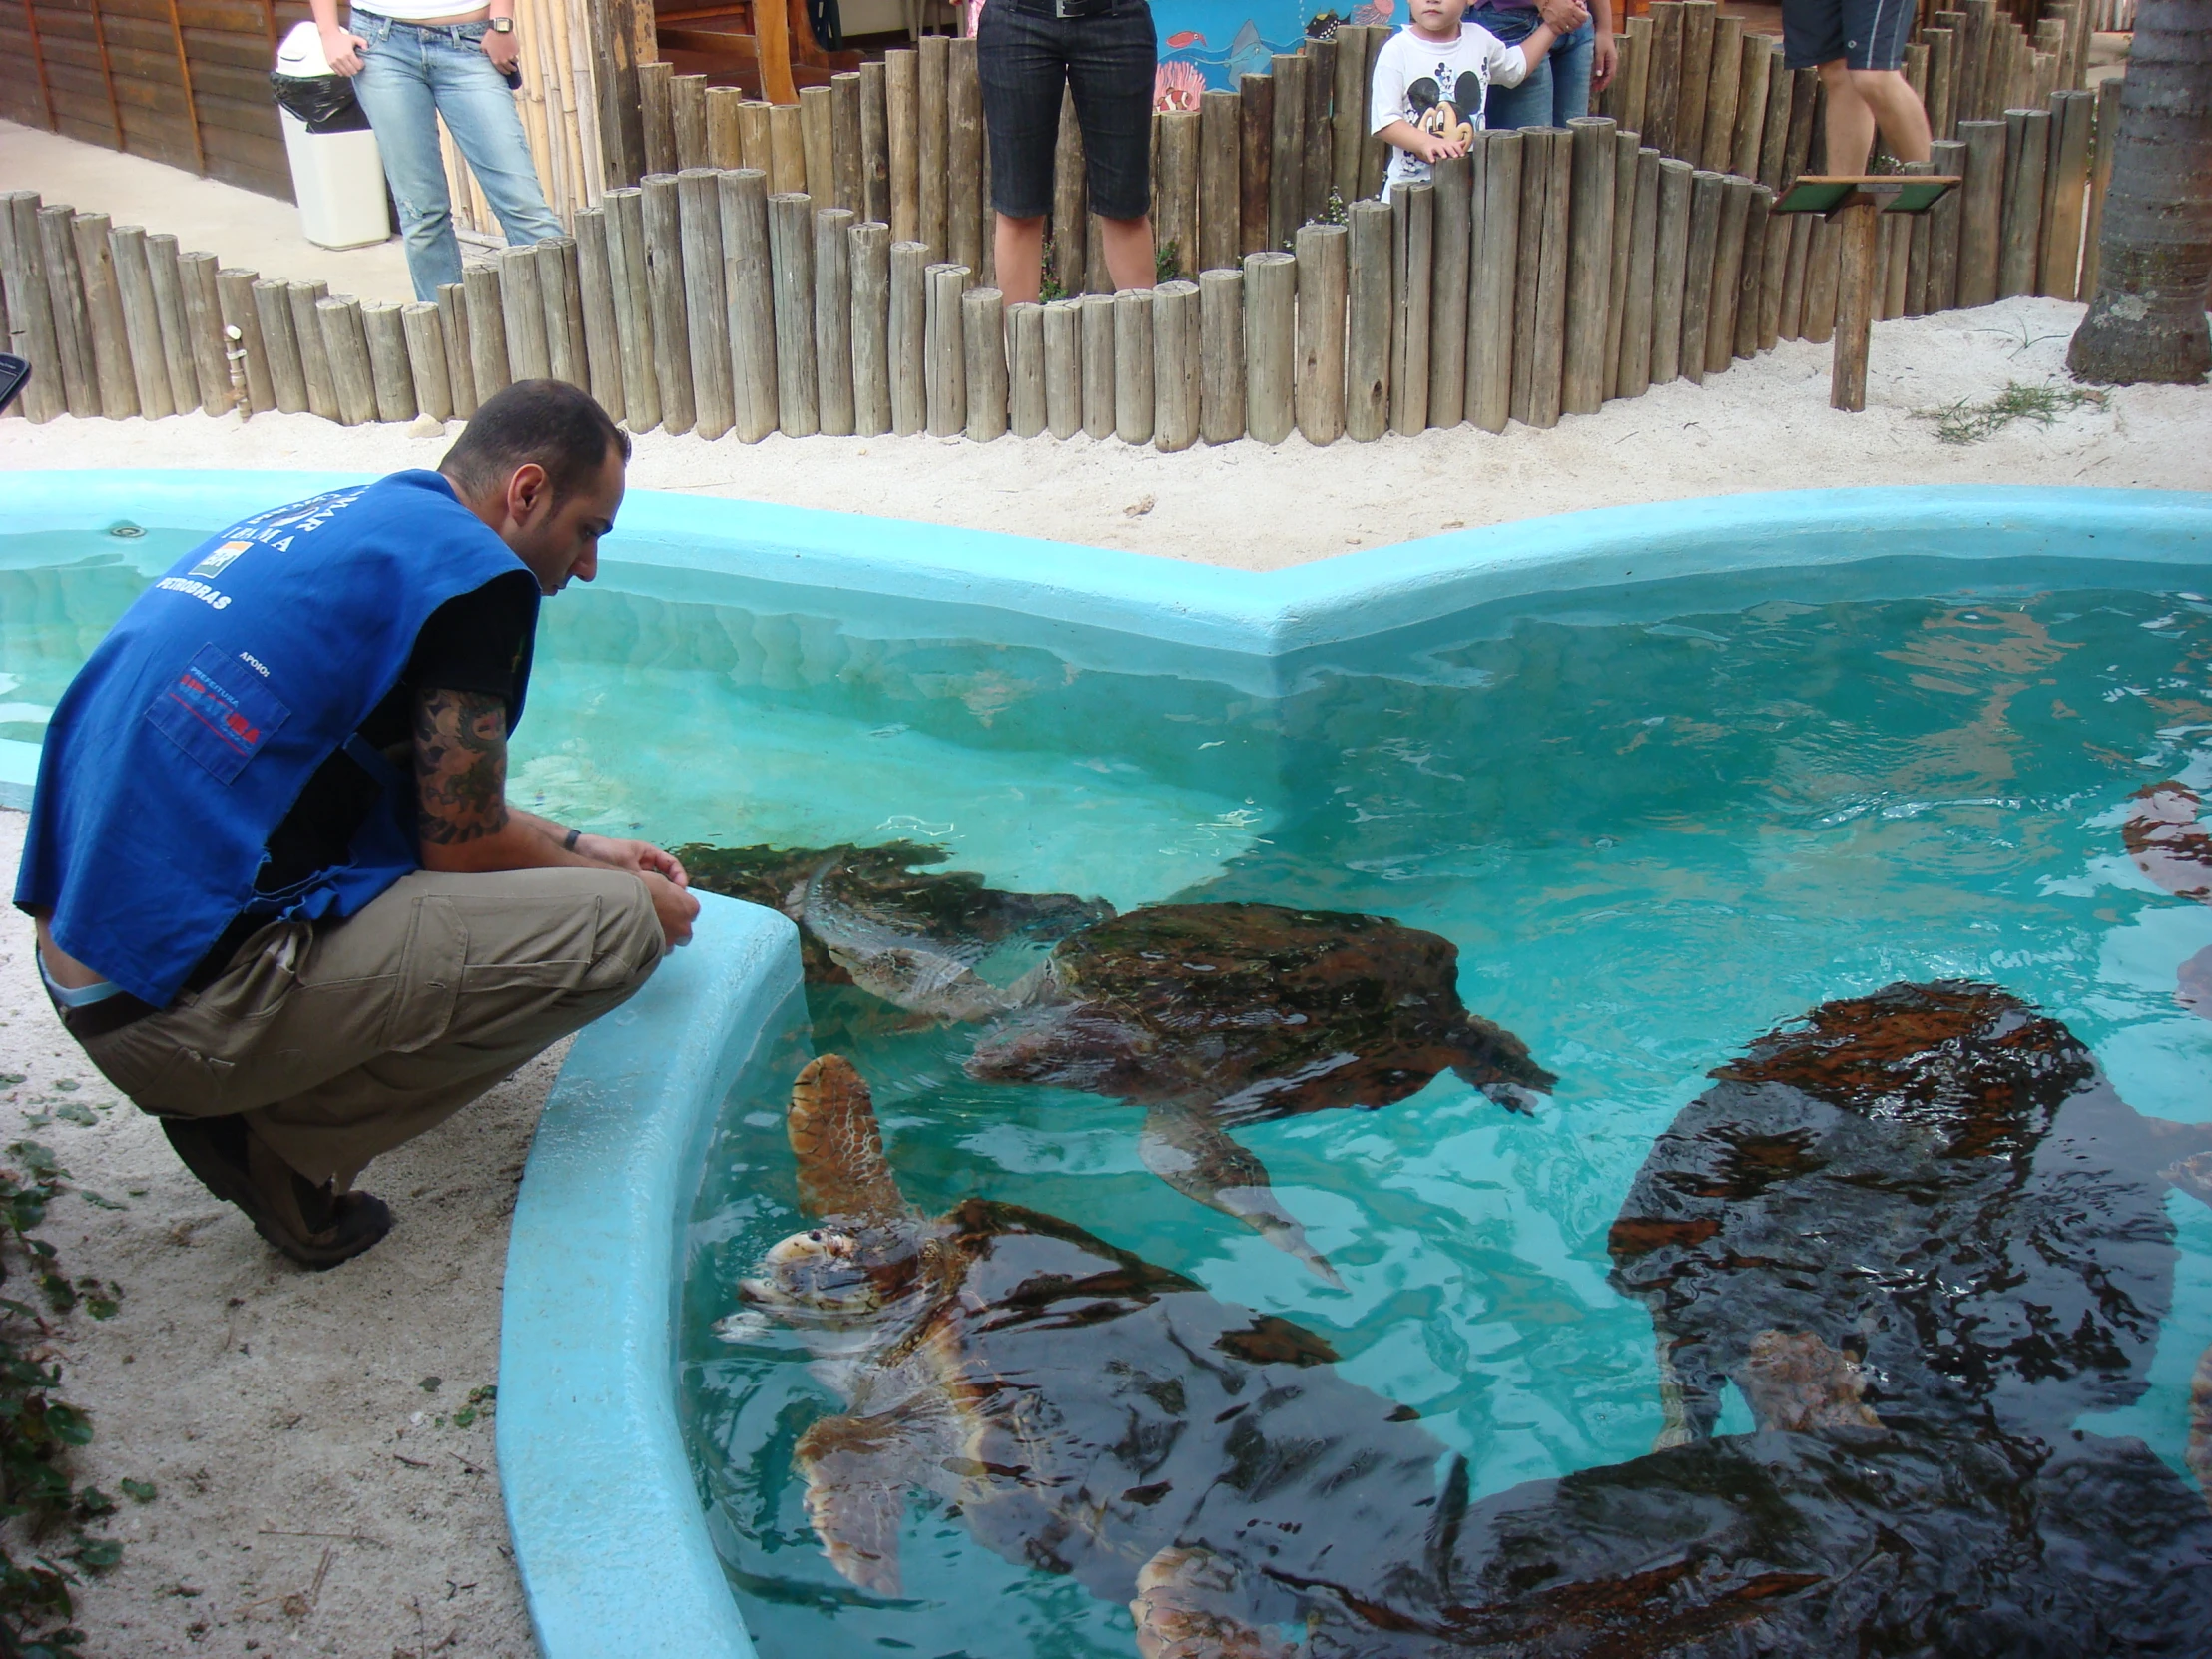 a person feeding two turtles in a large pool of water